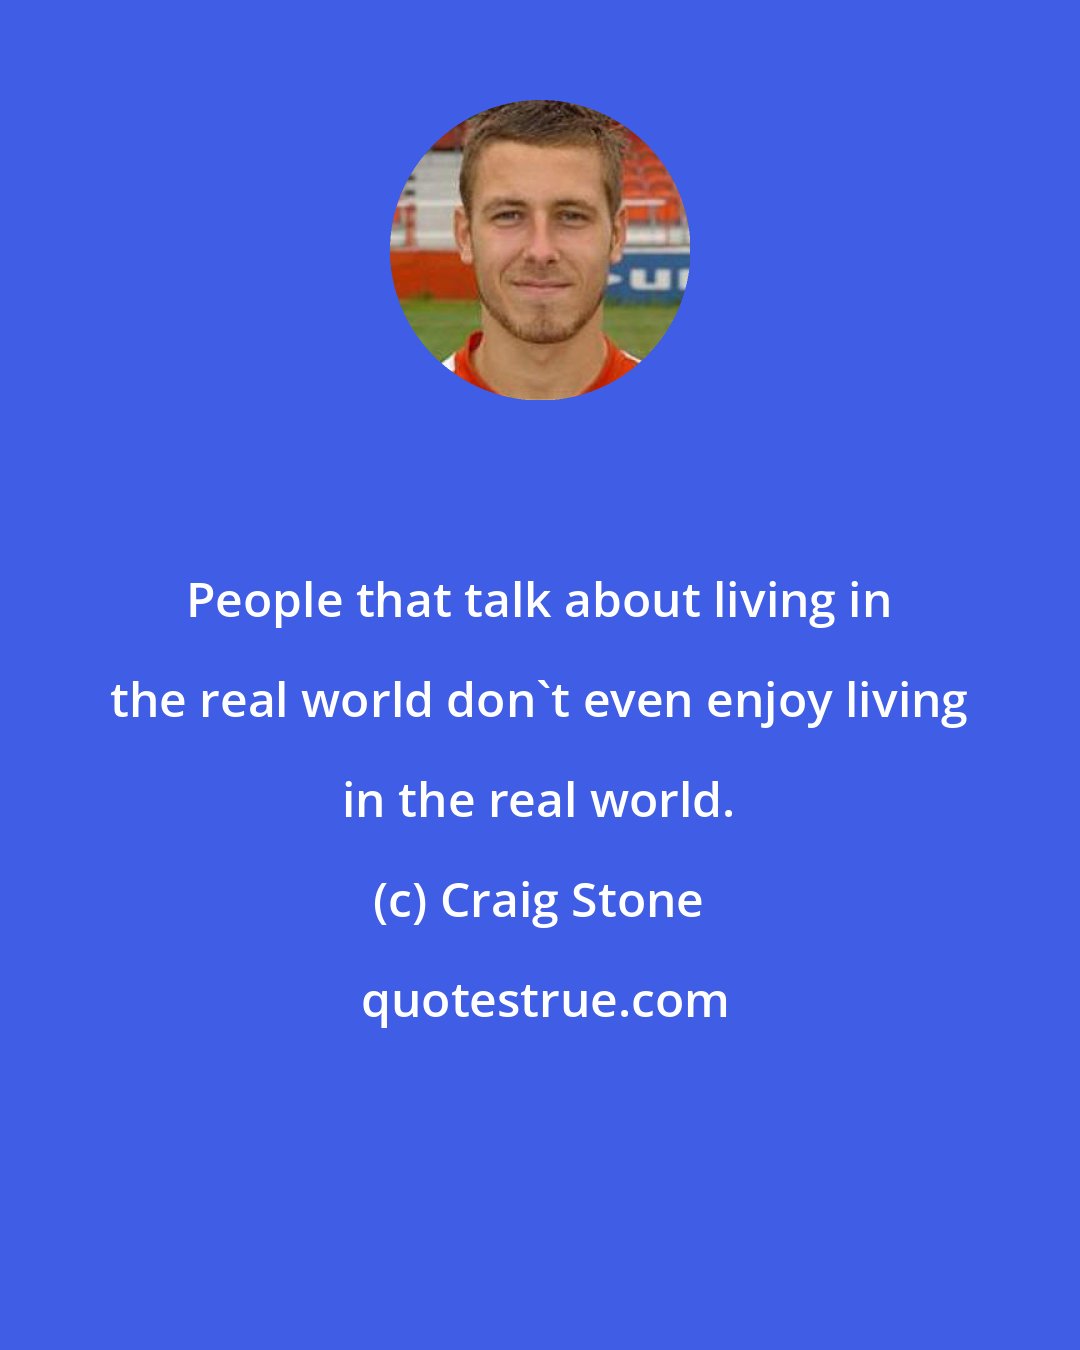 Craig Stone: People that talk about living in the real world don't even enjoy living in the real world.